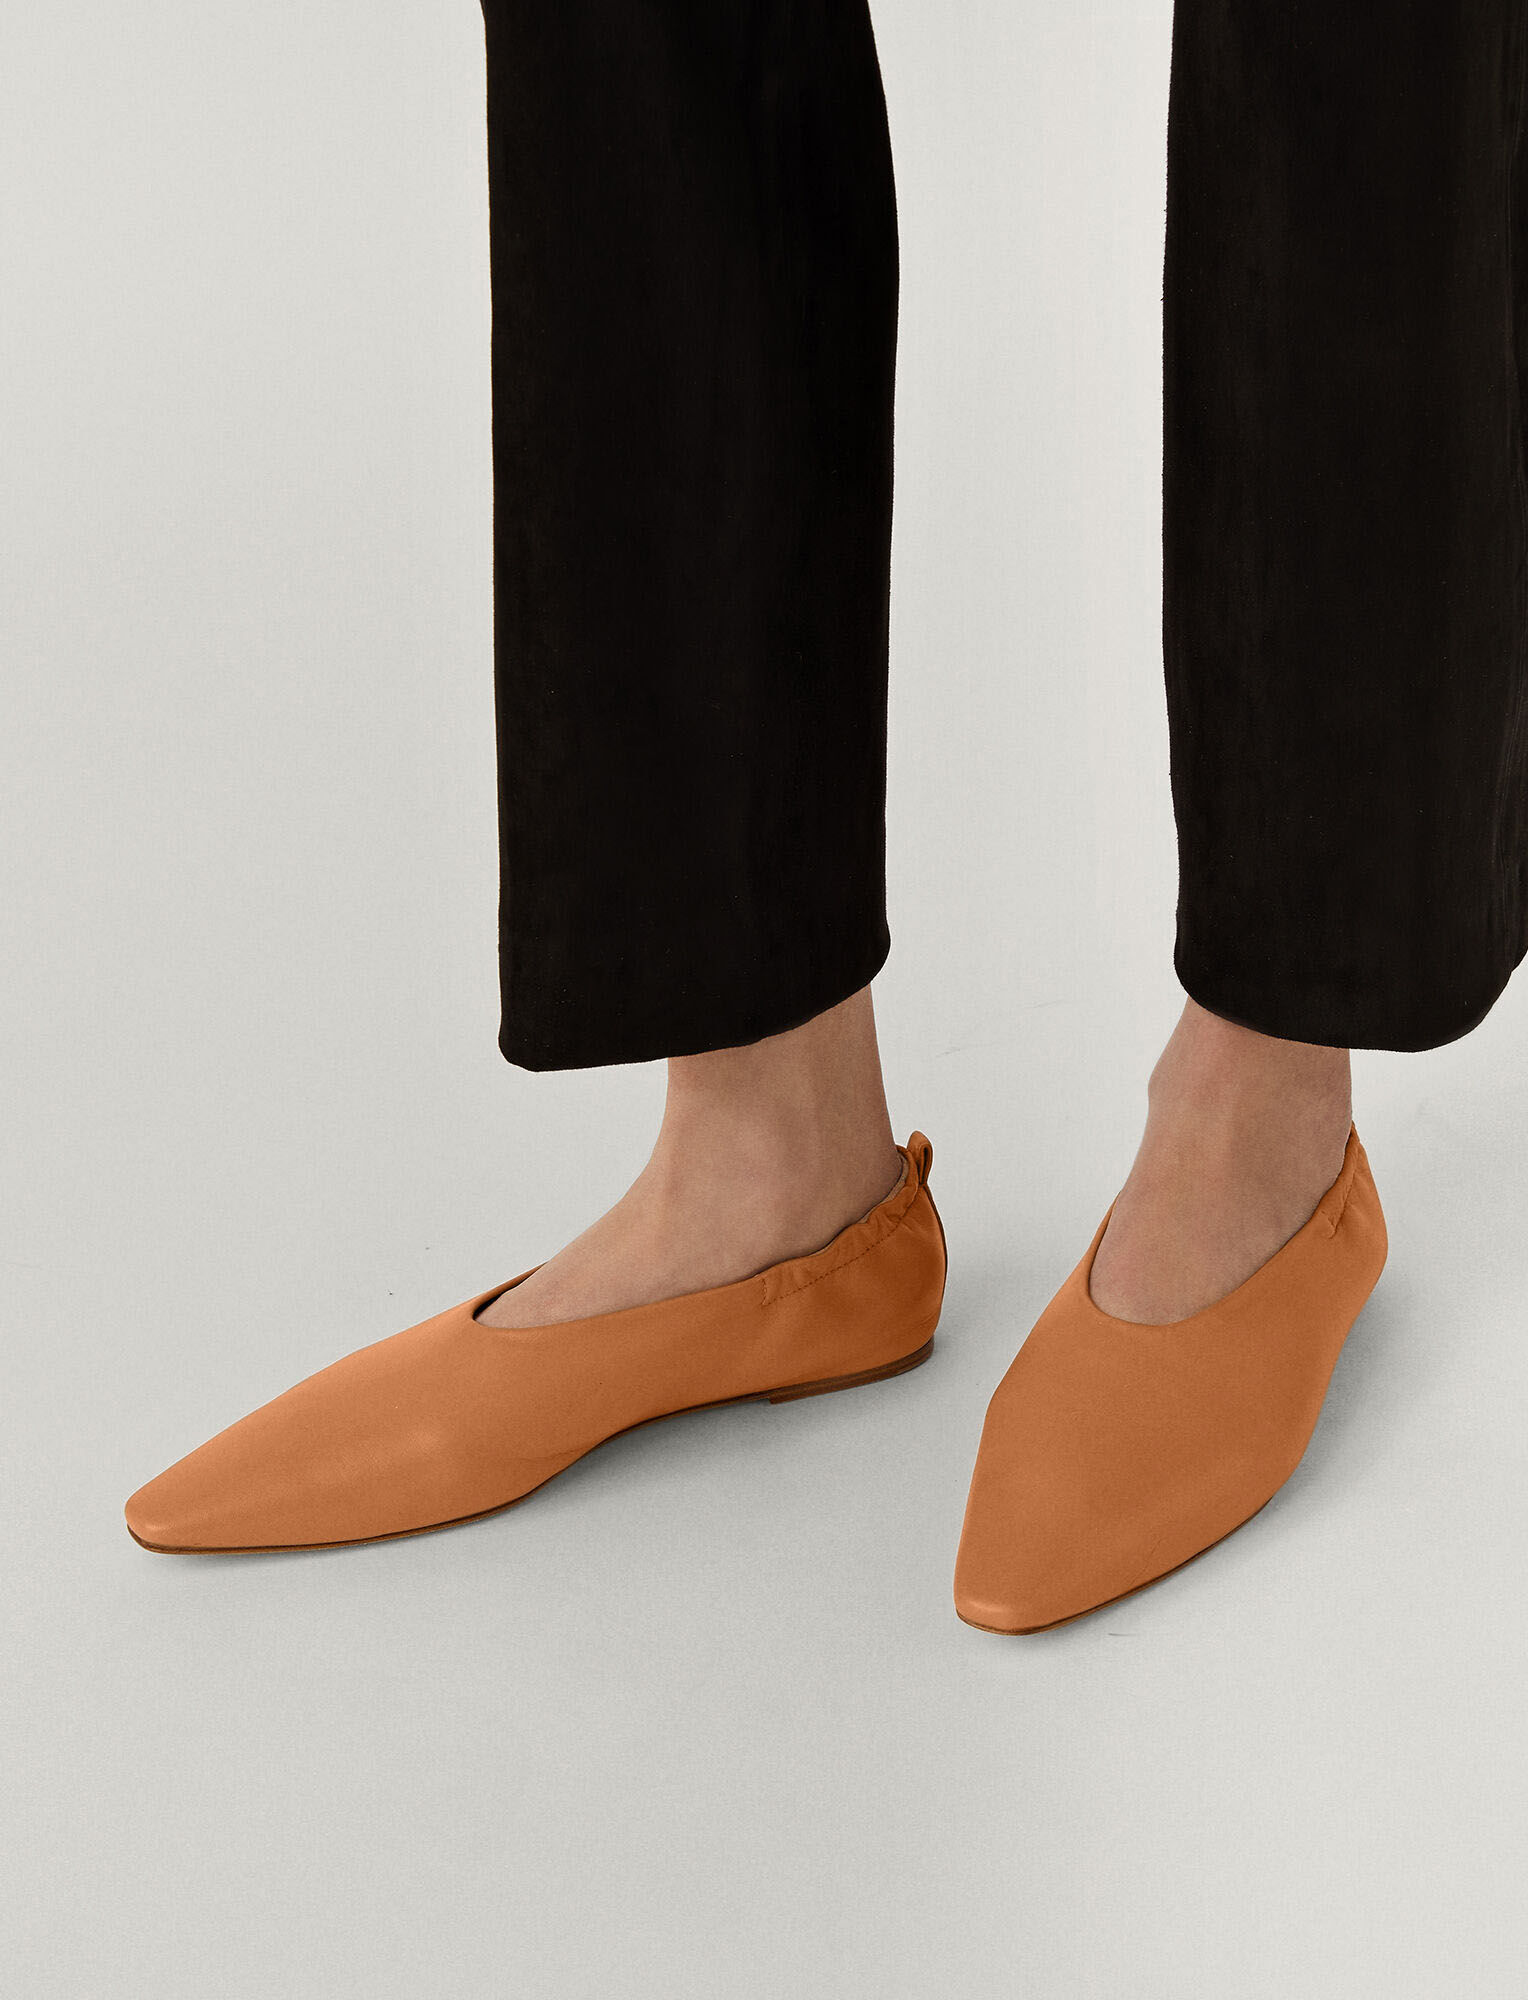 Joseph, Leather Pointy Ballerina Shoes, in Caramel